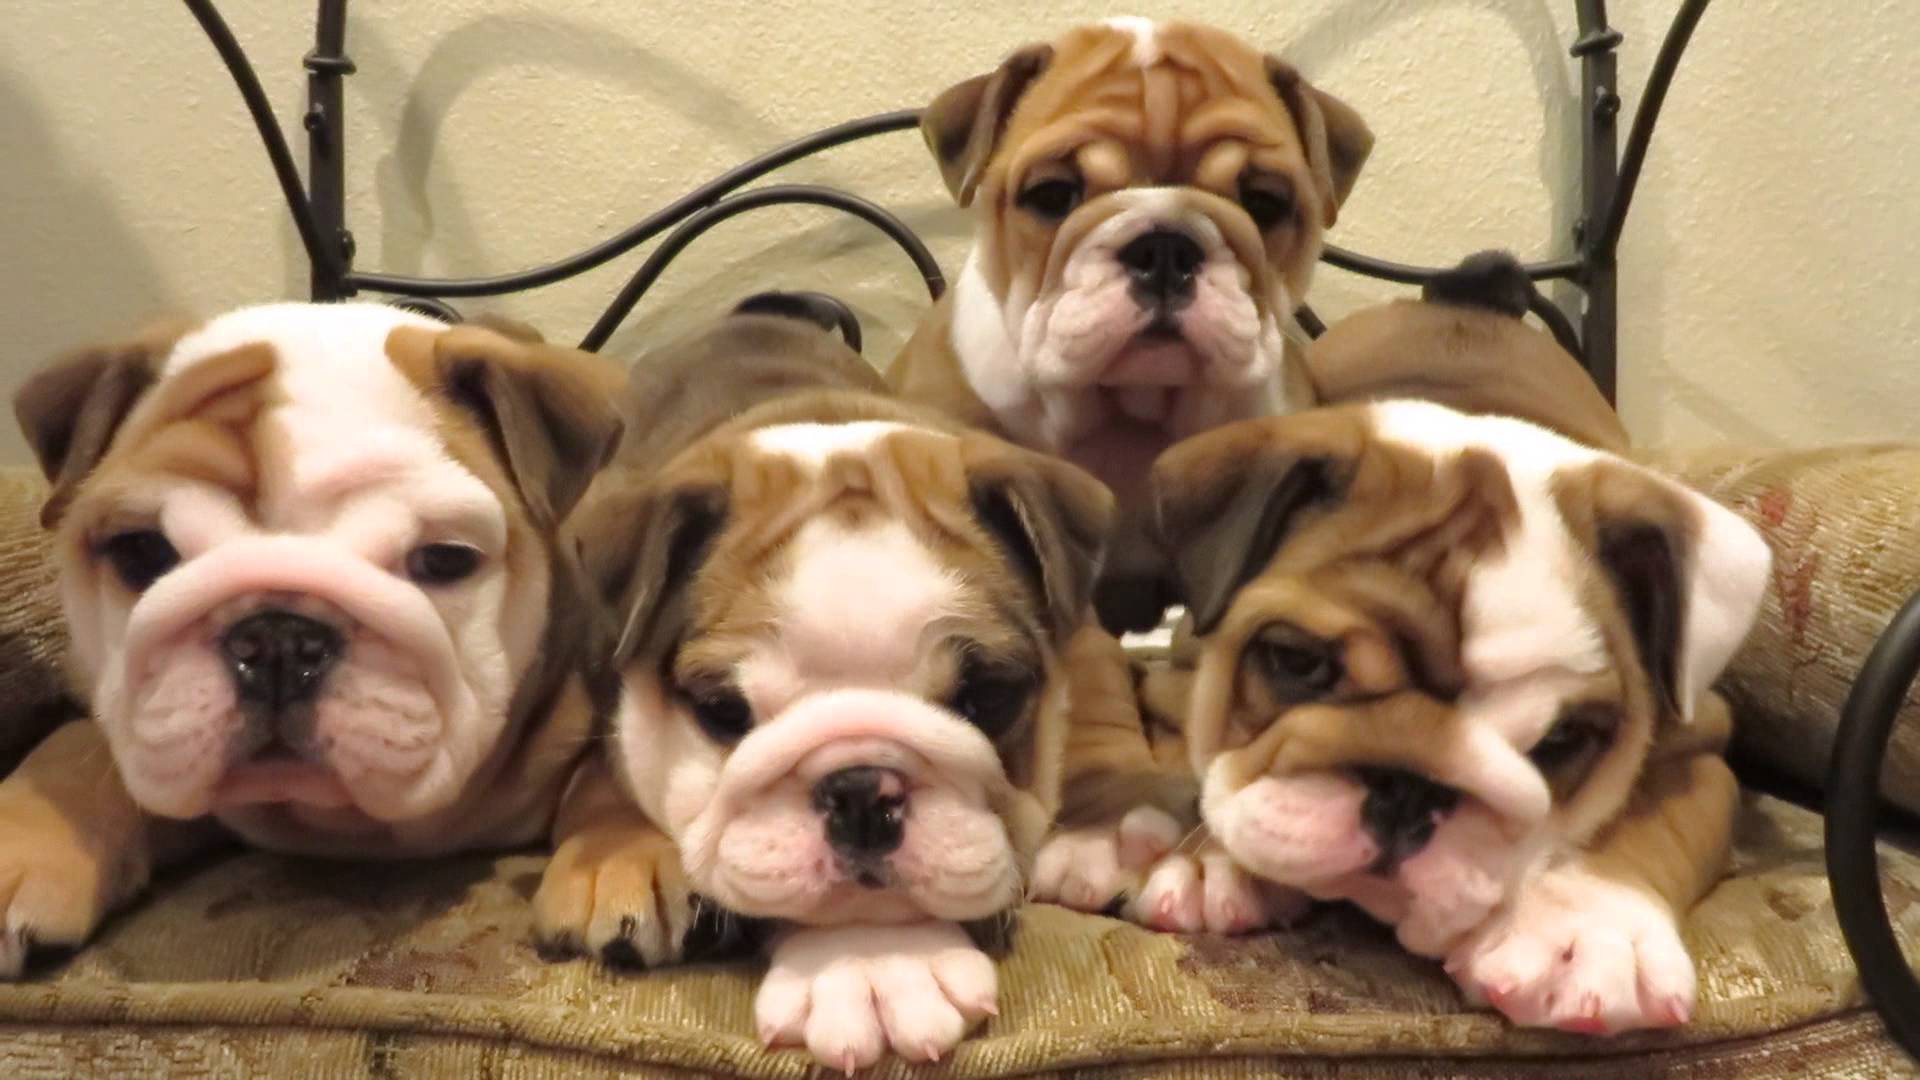 Cutest English Bulldog Puppies Ever They Will Melt Your Heart